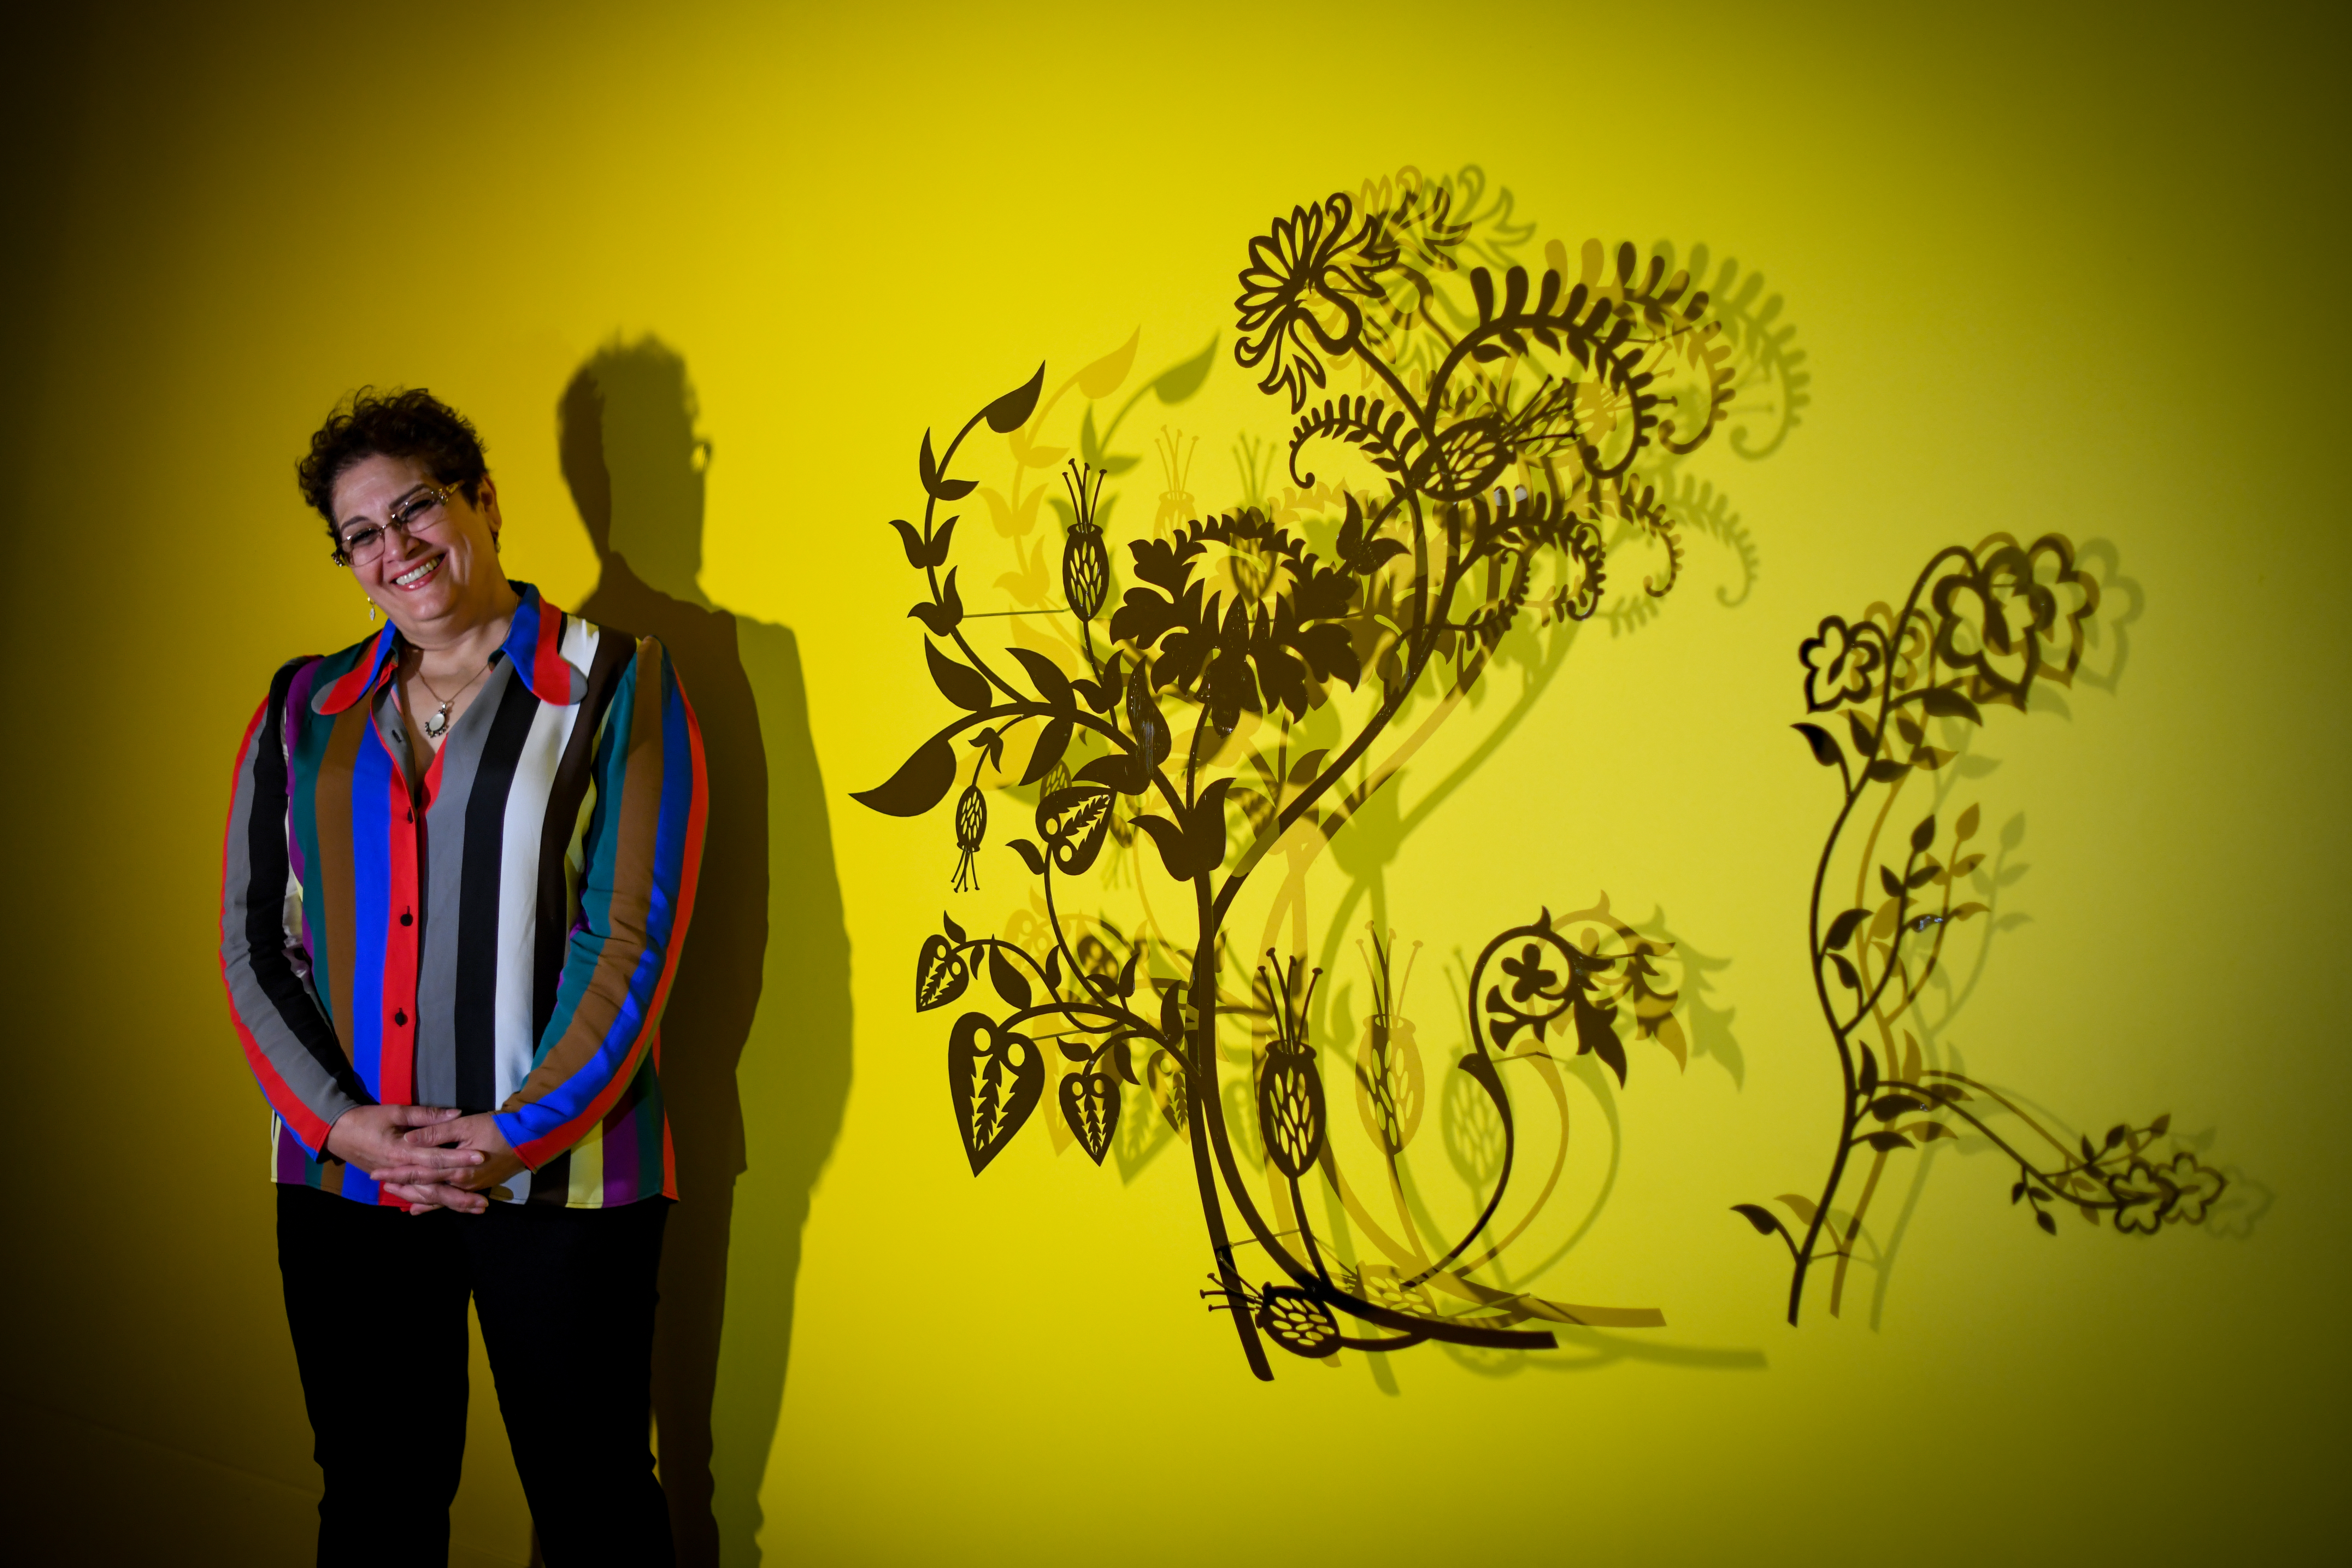 A Pakistani woman with short hair in a striped blouse stands smiling against a yellow wall, next to a dramatically lit wall installation of metal flower silhouettes which cast shadows on the wall